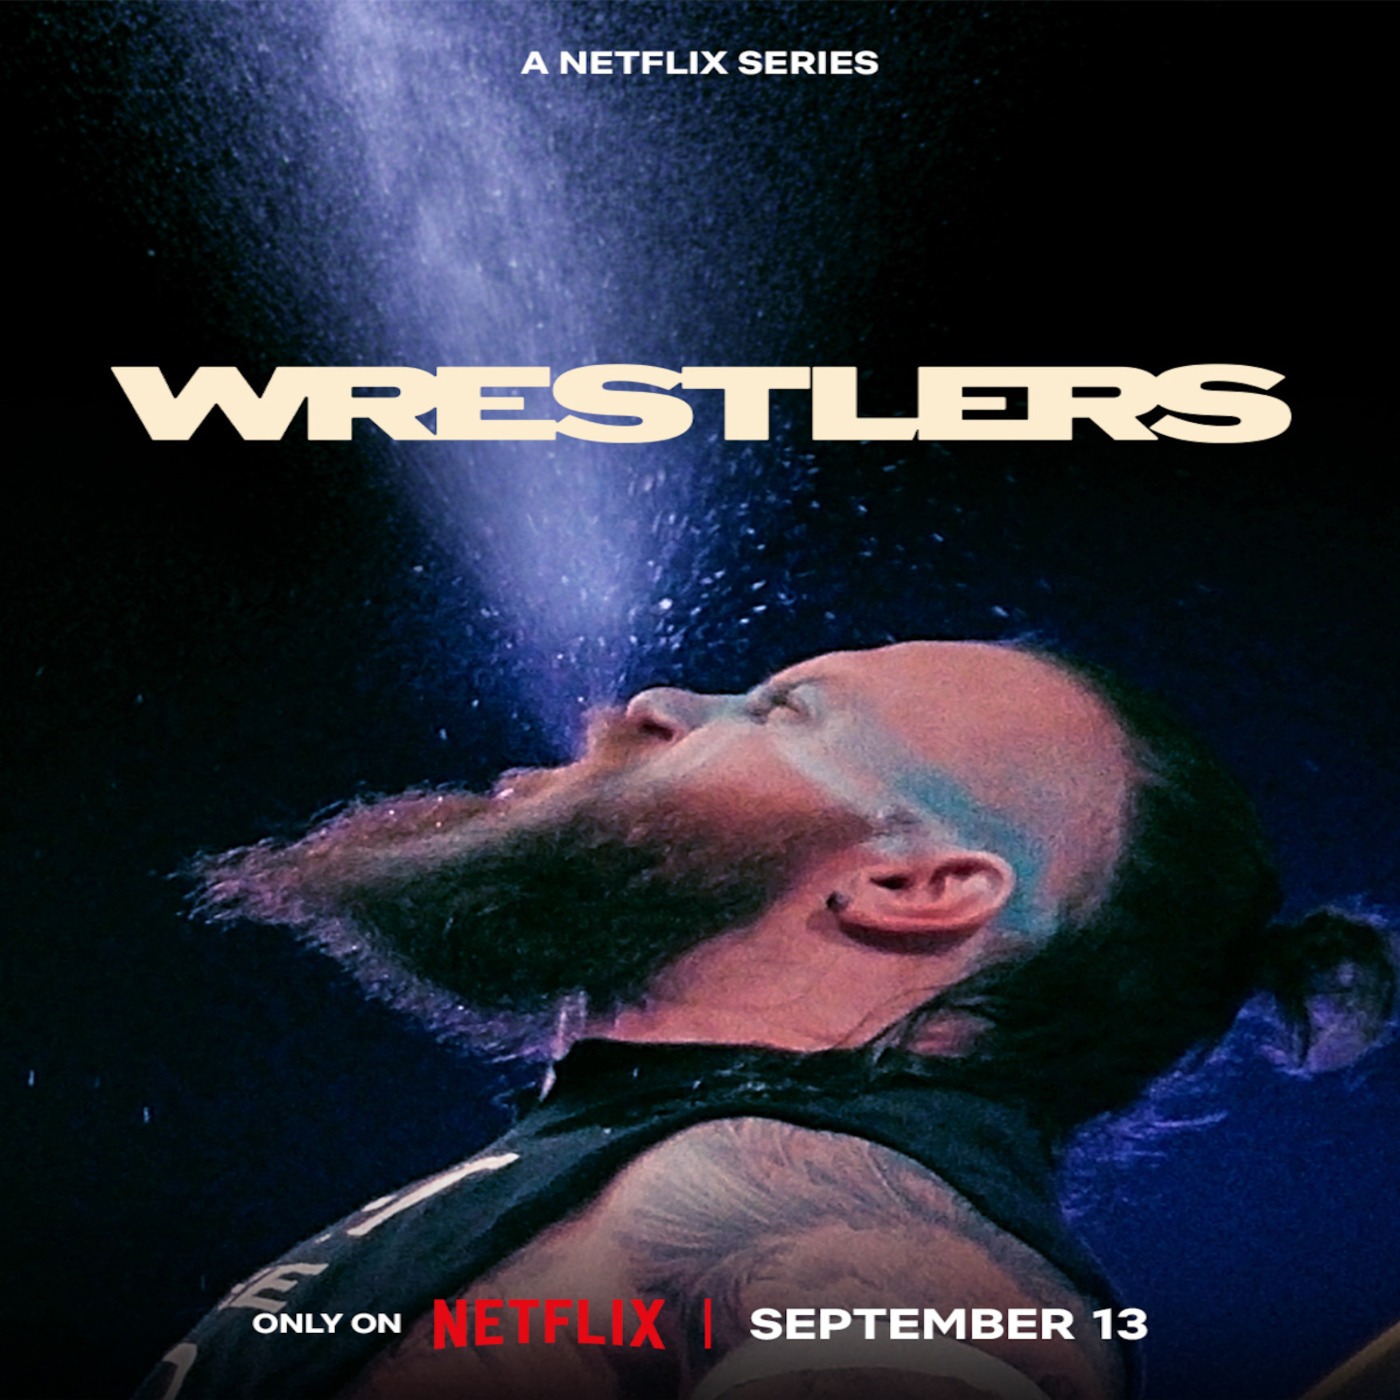 E156: Review of Netflix's Wrestlers Episode One